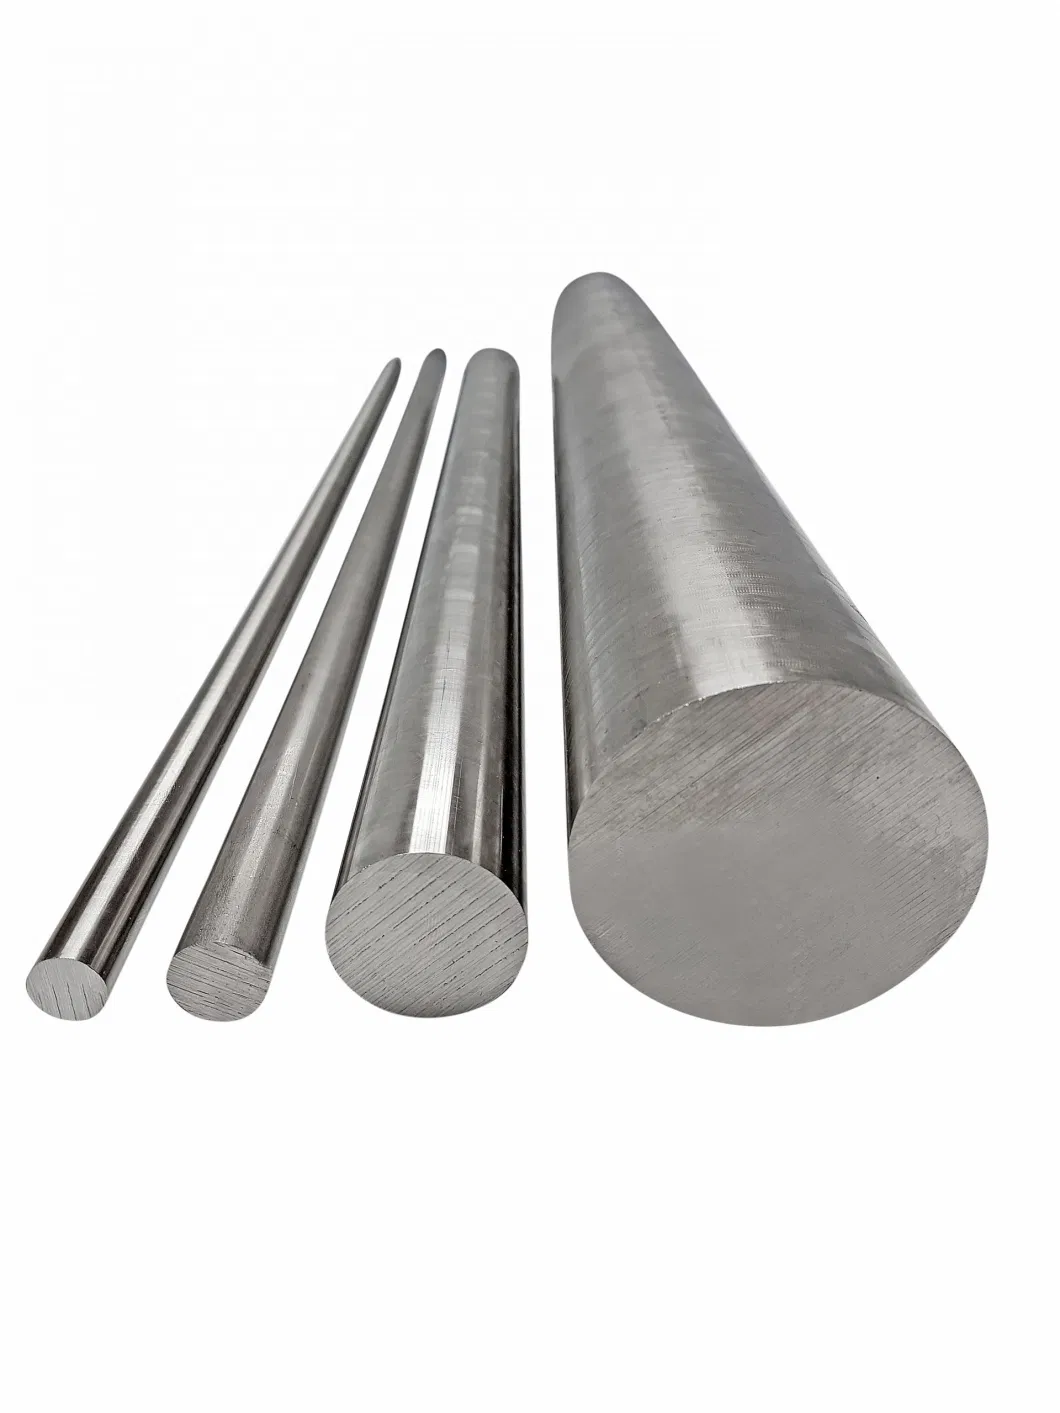 Cold Rolled Stainless Steel 301 303 321 310S Bright Stainless Steel Bar Rod